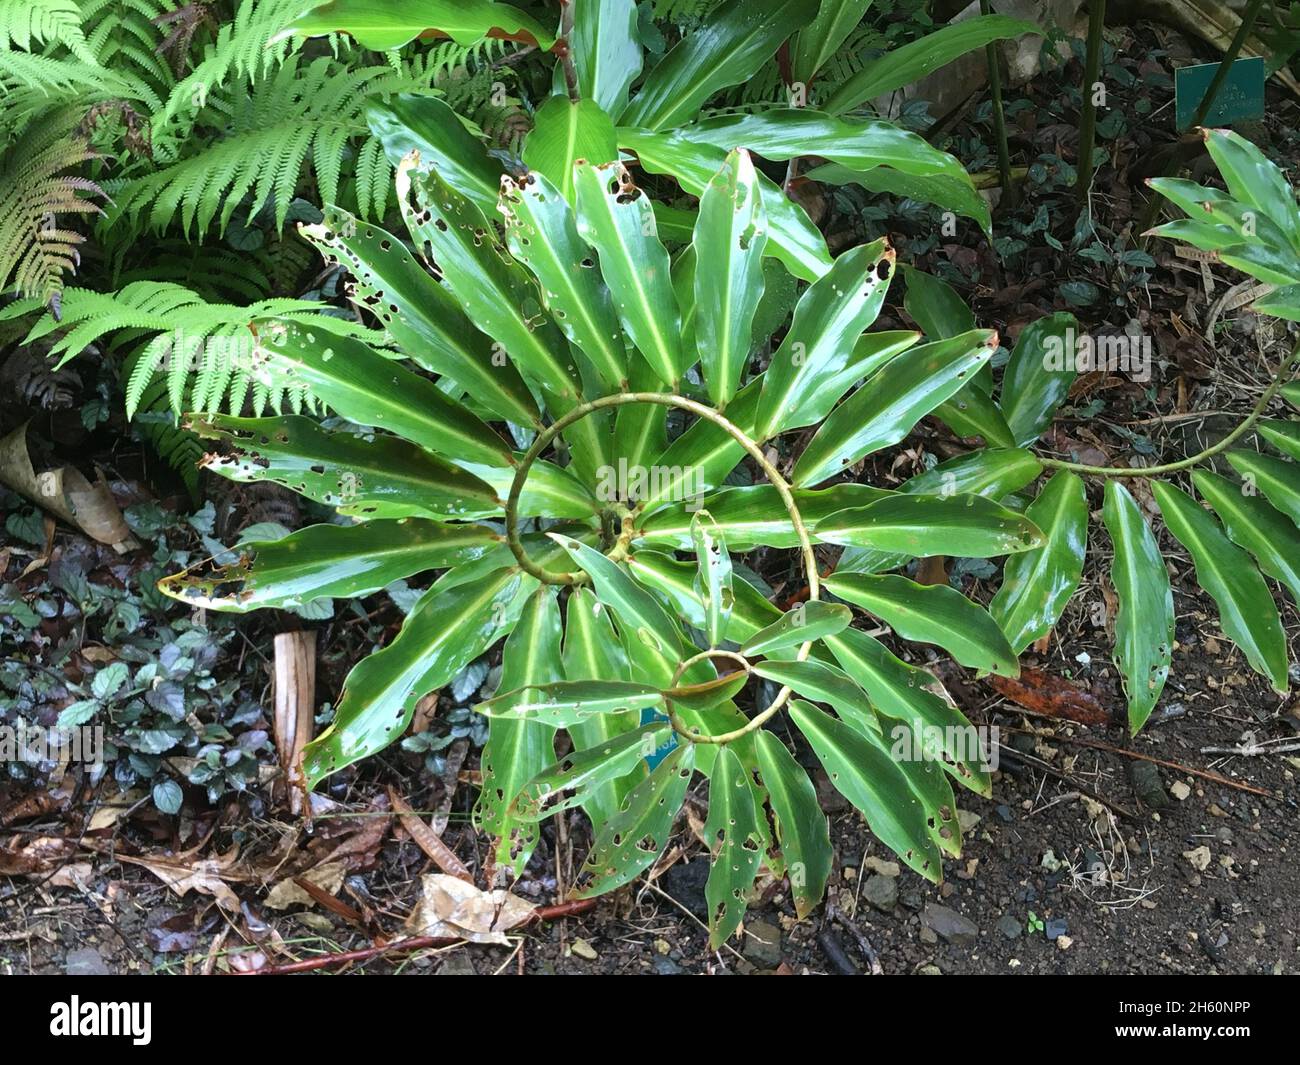 Spiral ginger plant growing in the area of Waimea Falls, Oahu, Hawaii Stock Photo